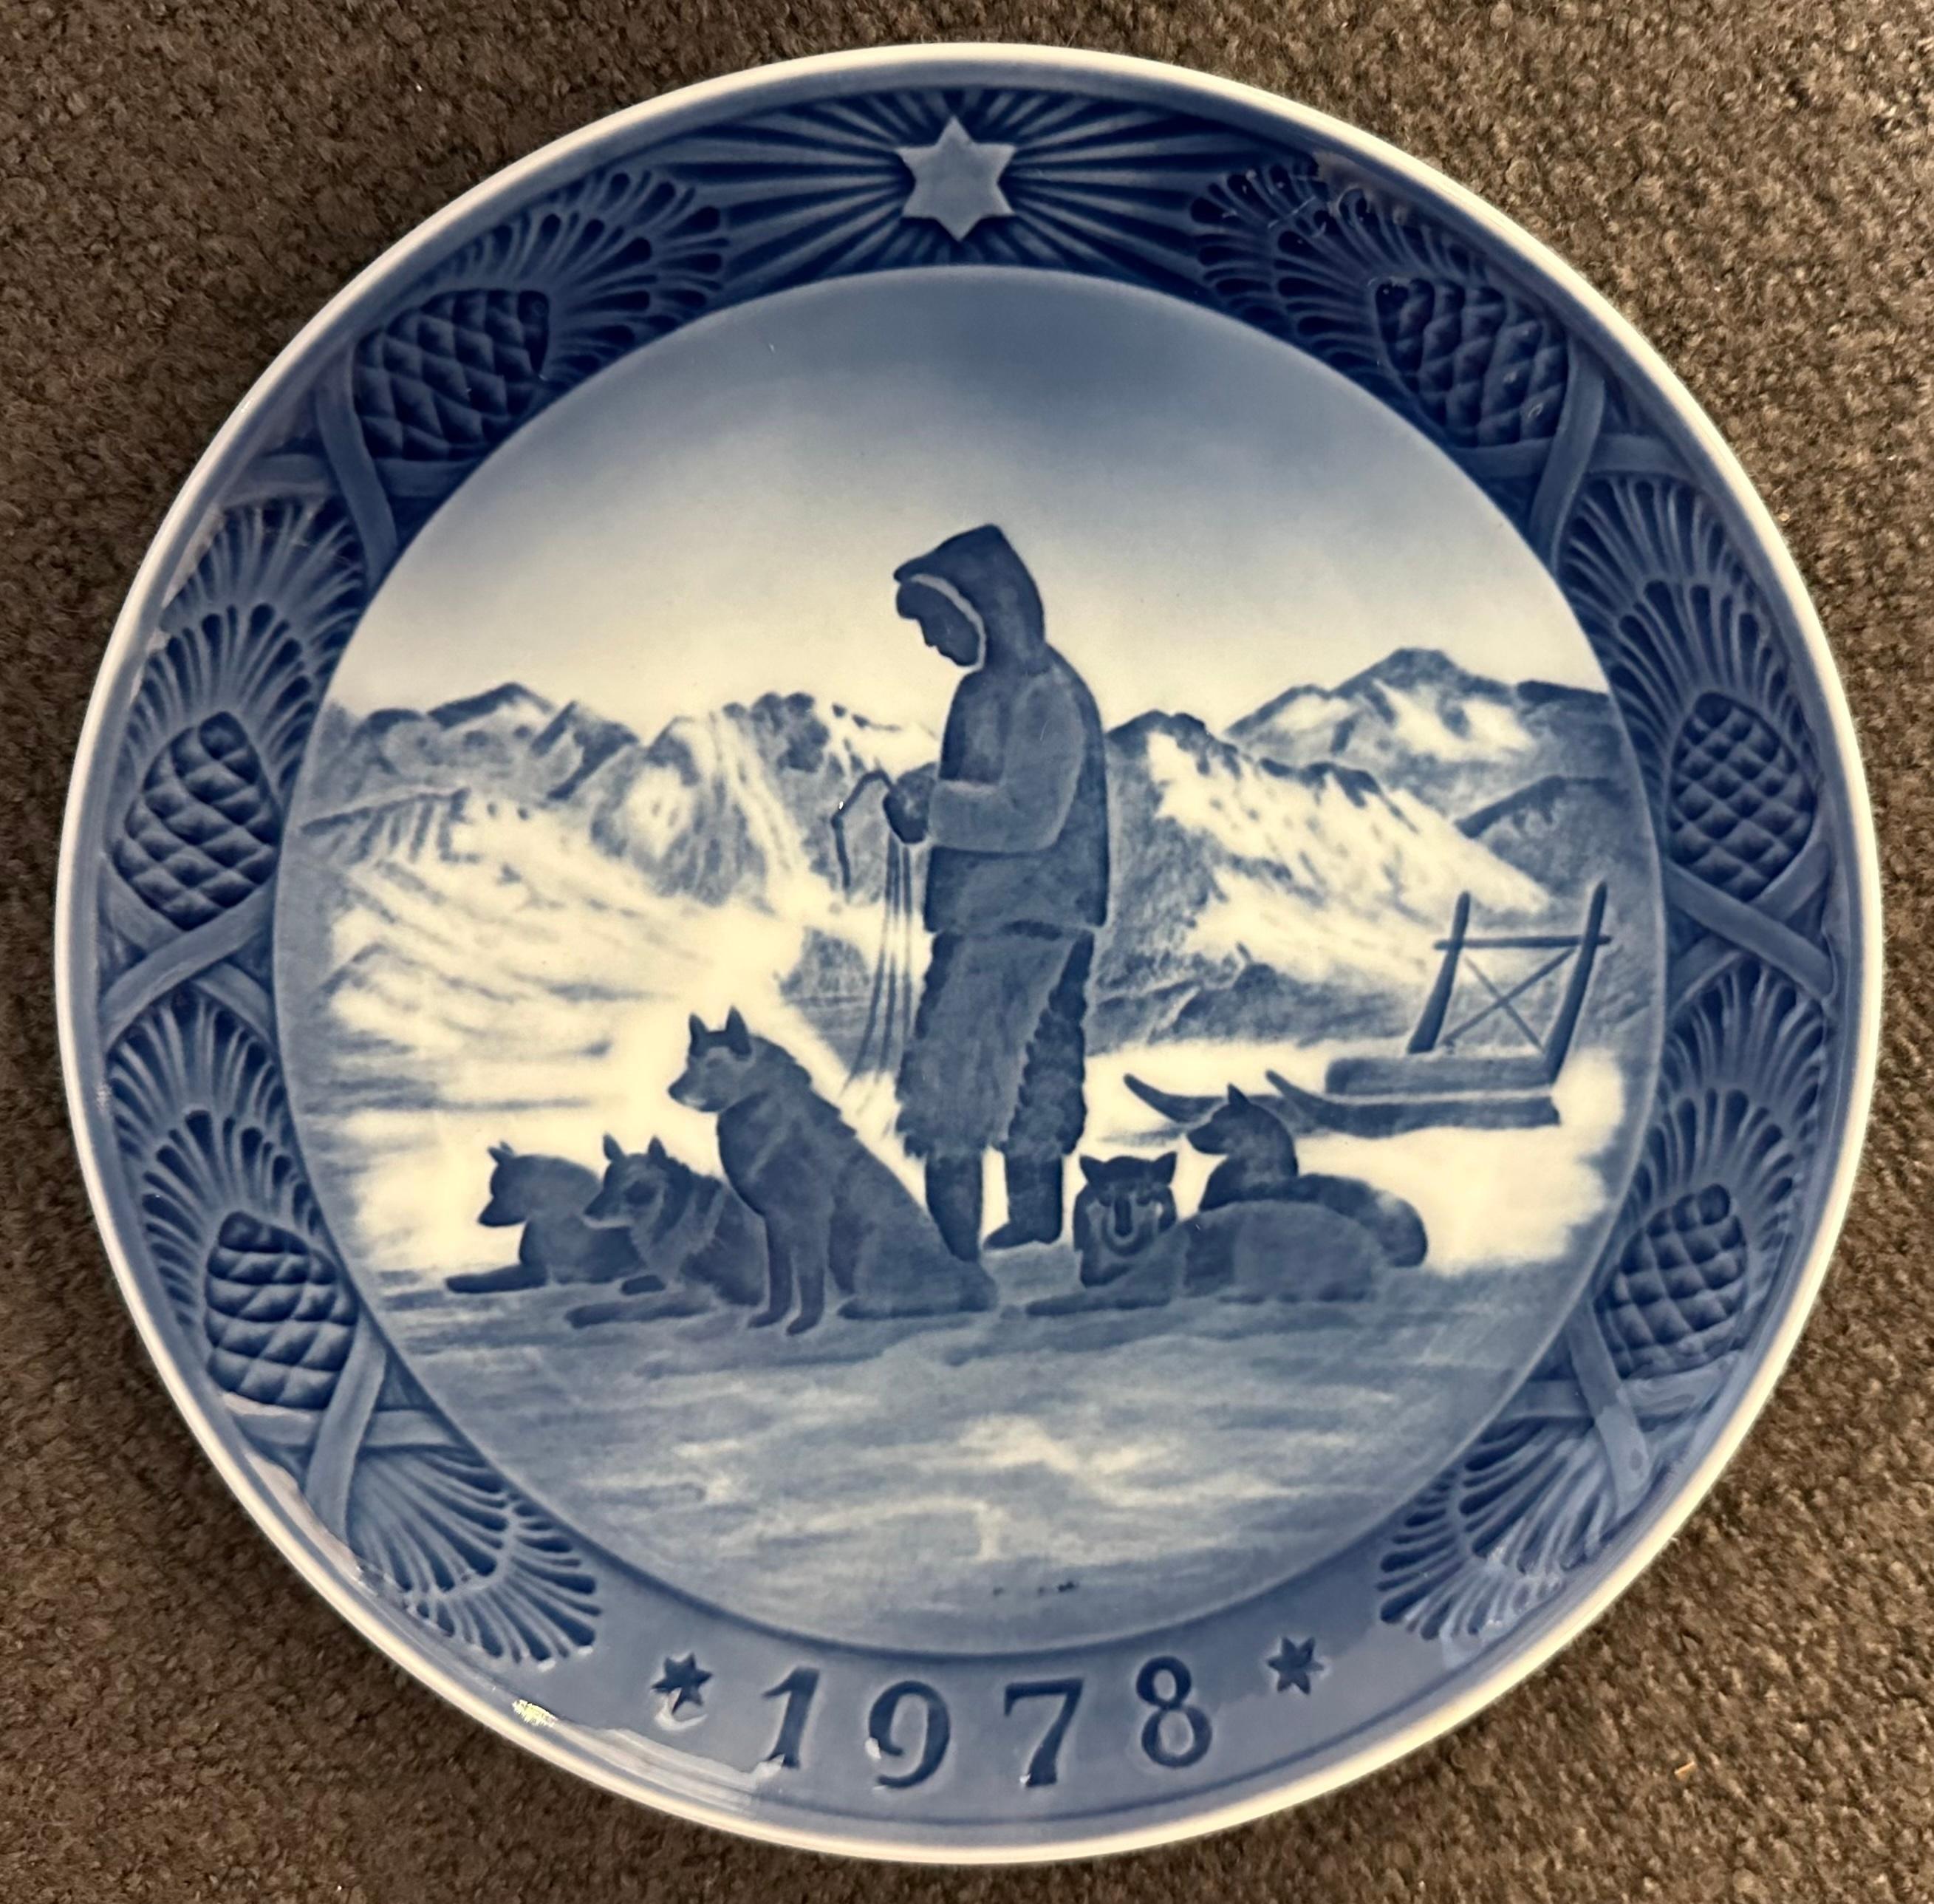 Royal Copenhagen 1978 Christmas Plate - Greenland Scenery designed by Kai Lange. The scene on this year's Christmas Plate depicts a set of sled of five dogs possibly huskies and their young owner standing with their head facing downwards perhaps